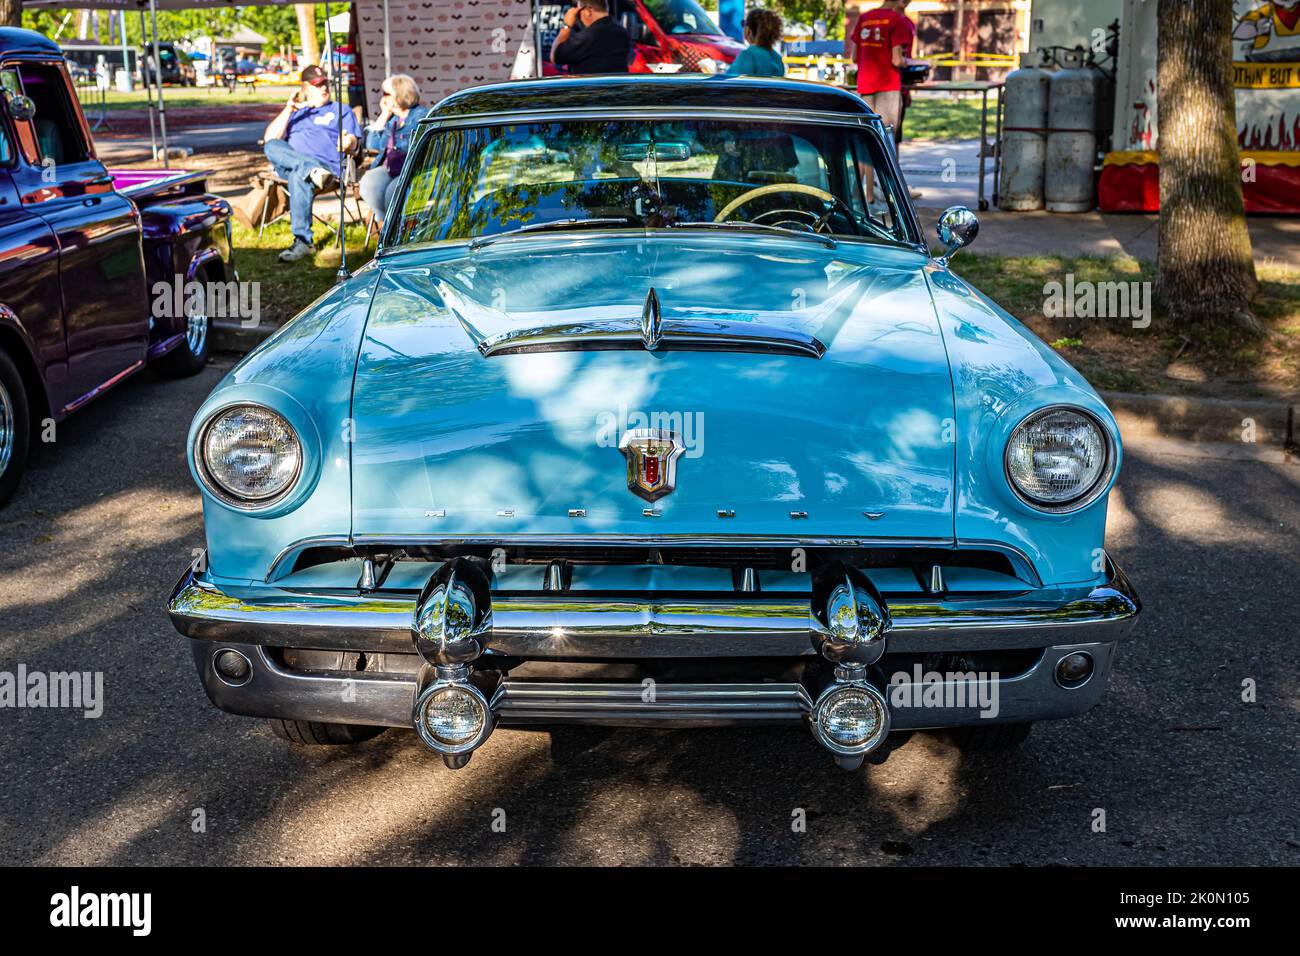 Falcon Heights, MN - June 18, 2022: High perspective front view of a 1953 Mercury Monterey Coupe at a local car show. Stock Photo